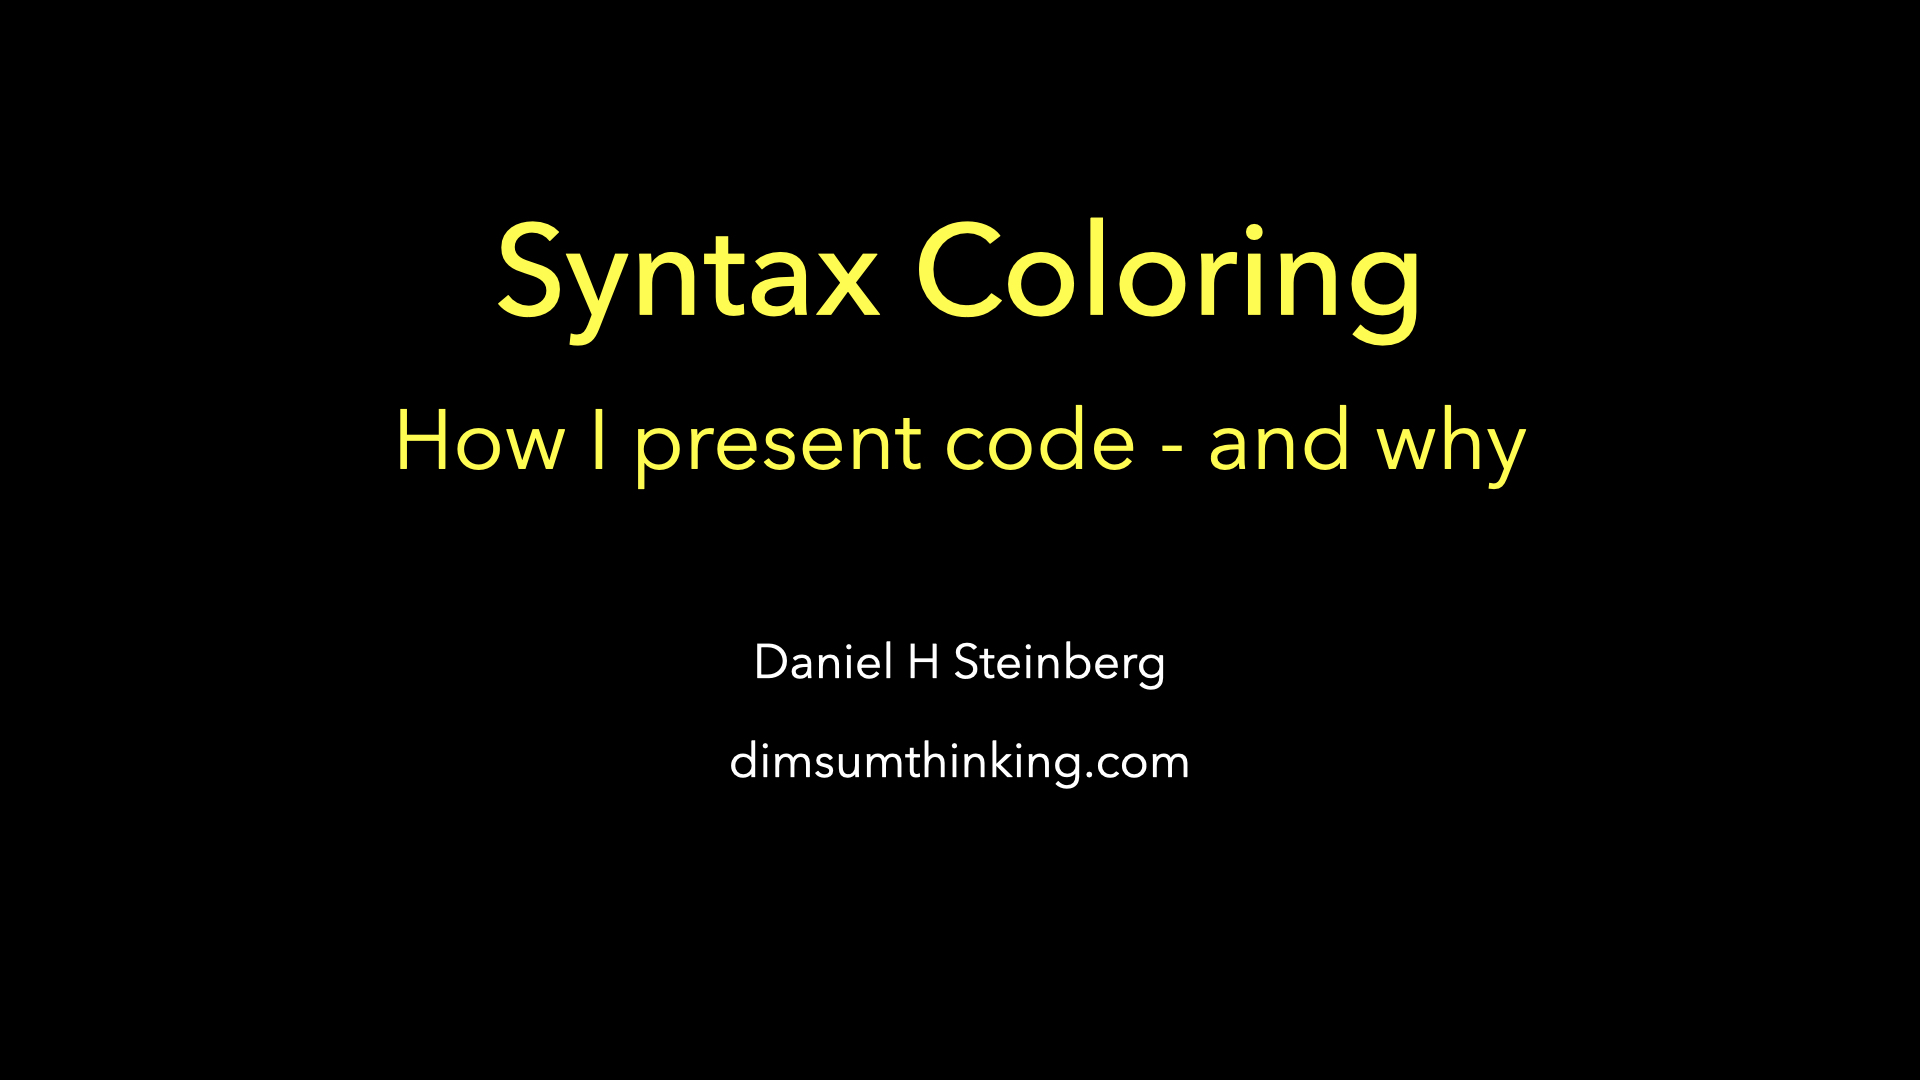 Link to Syntax Color talk